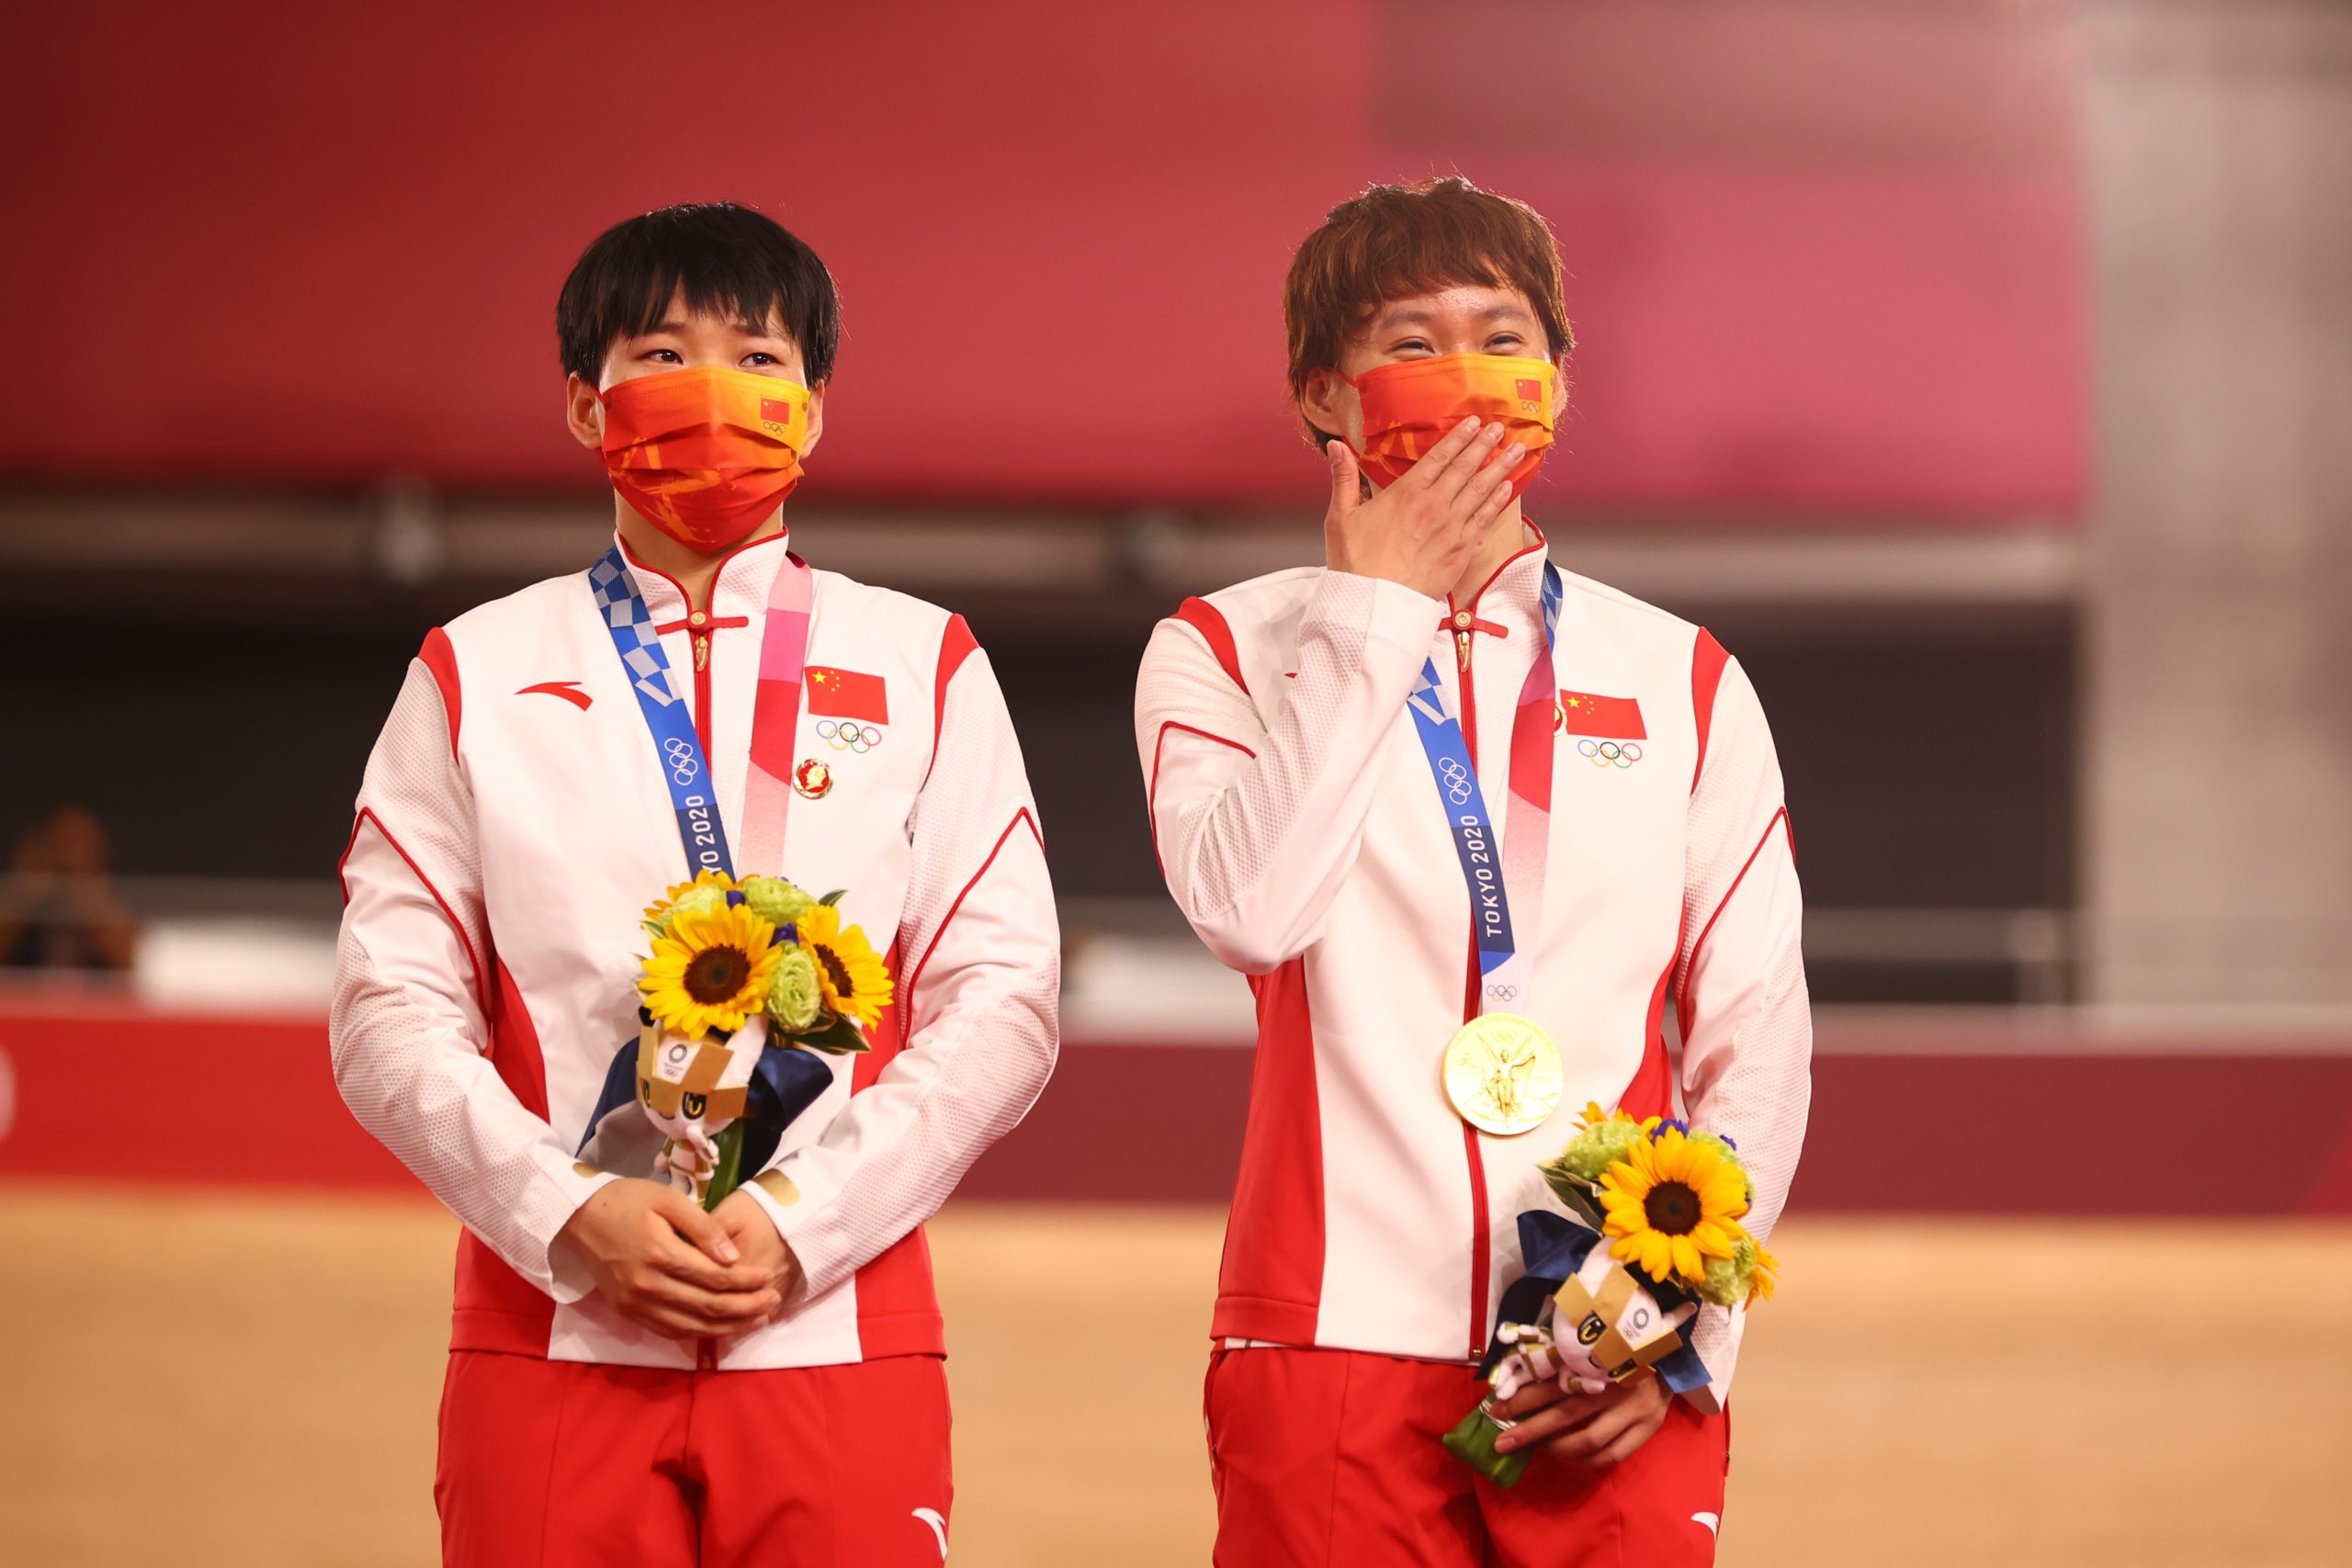 Gold medalists Bao Shanju and Zhong Tianshi of China wearing protective face masks pose with badges of the late Chinese chairman Mao Zedong pinned to their tracksuits. REUTERS/Matthew Childs